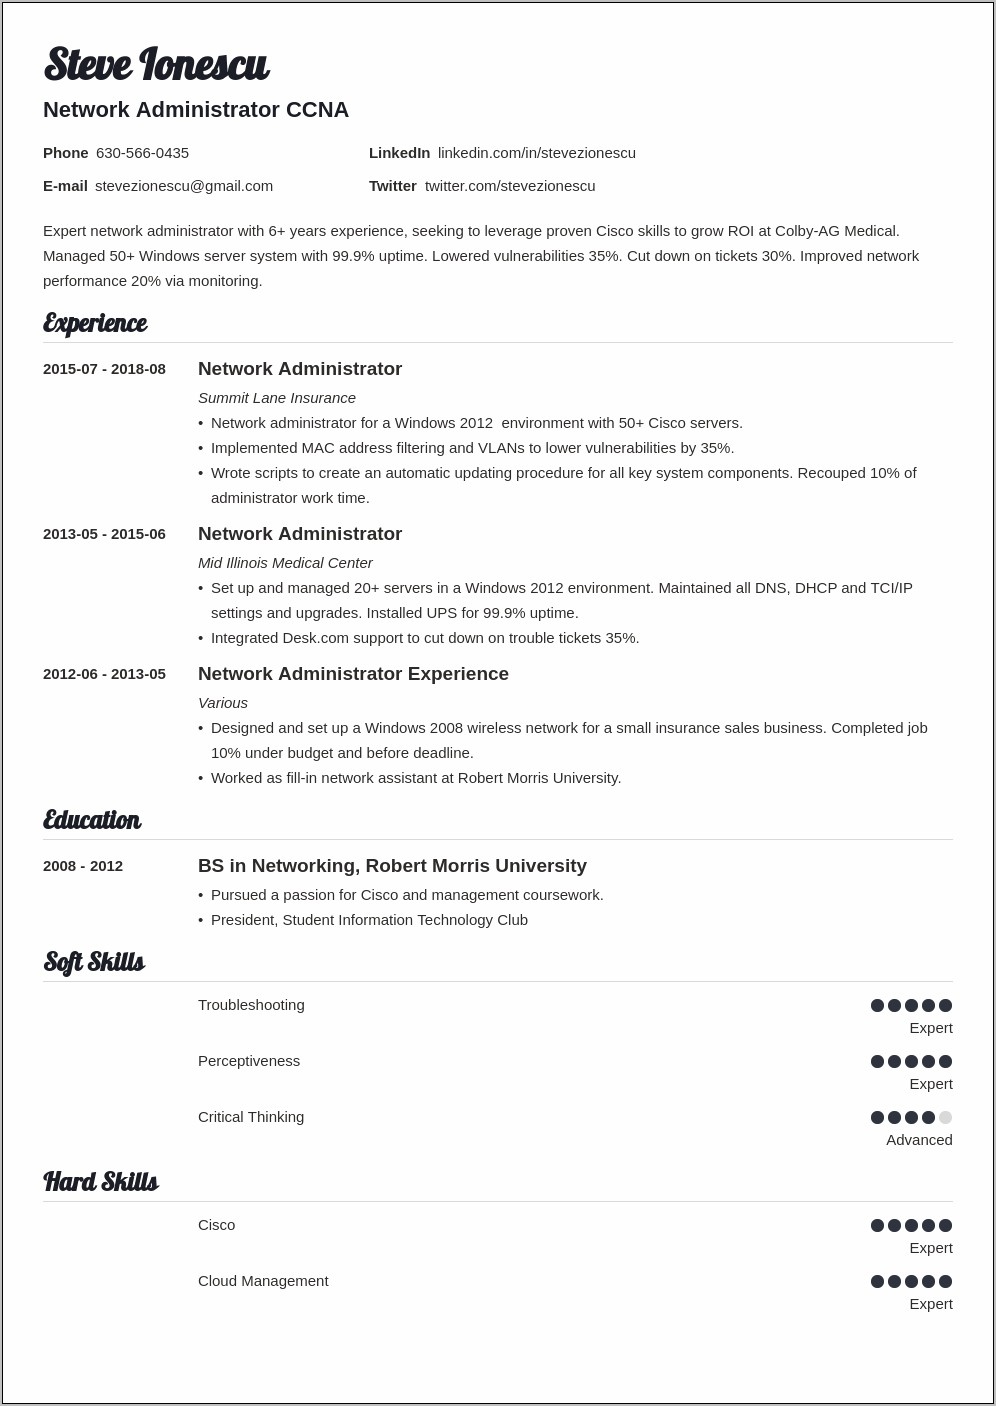 Network Administrator Experience Resume Sample